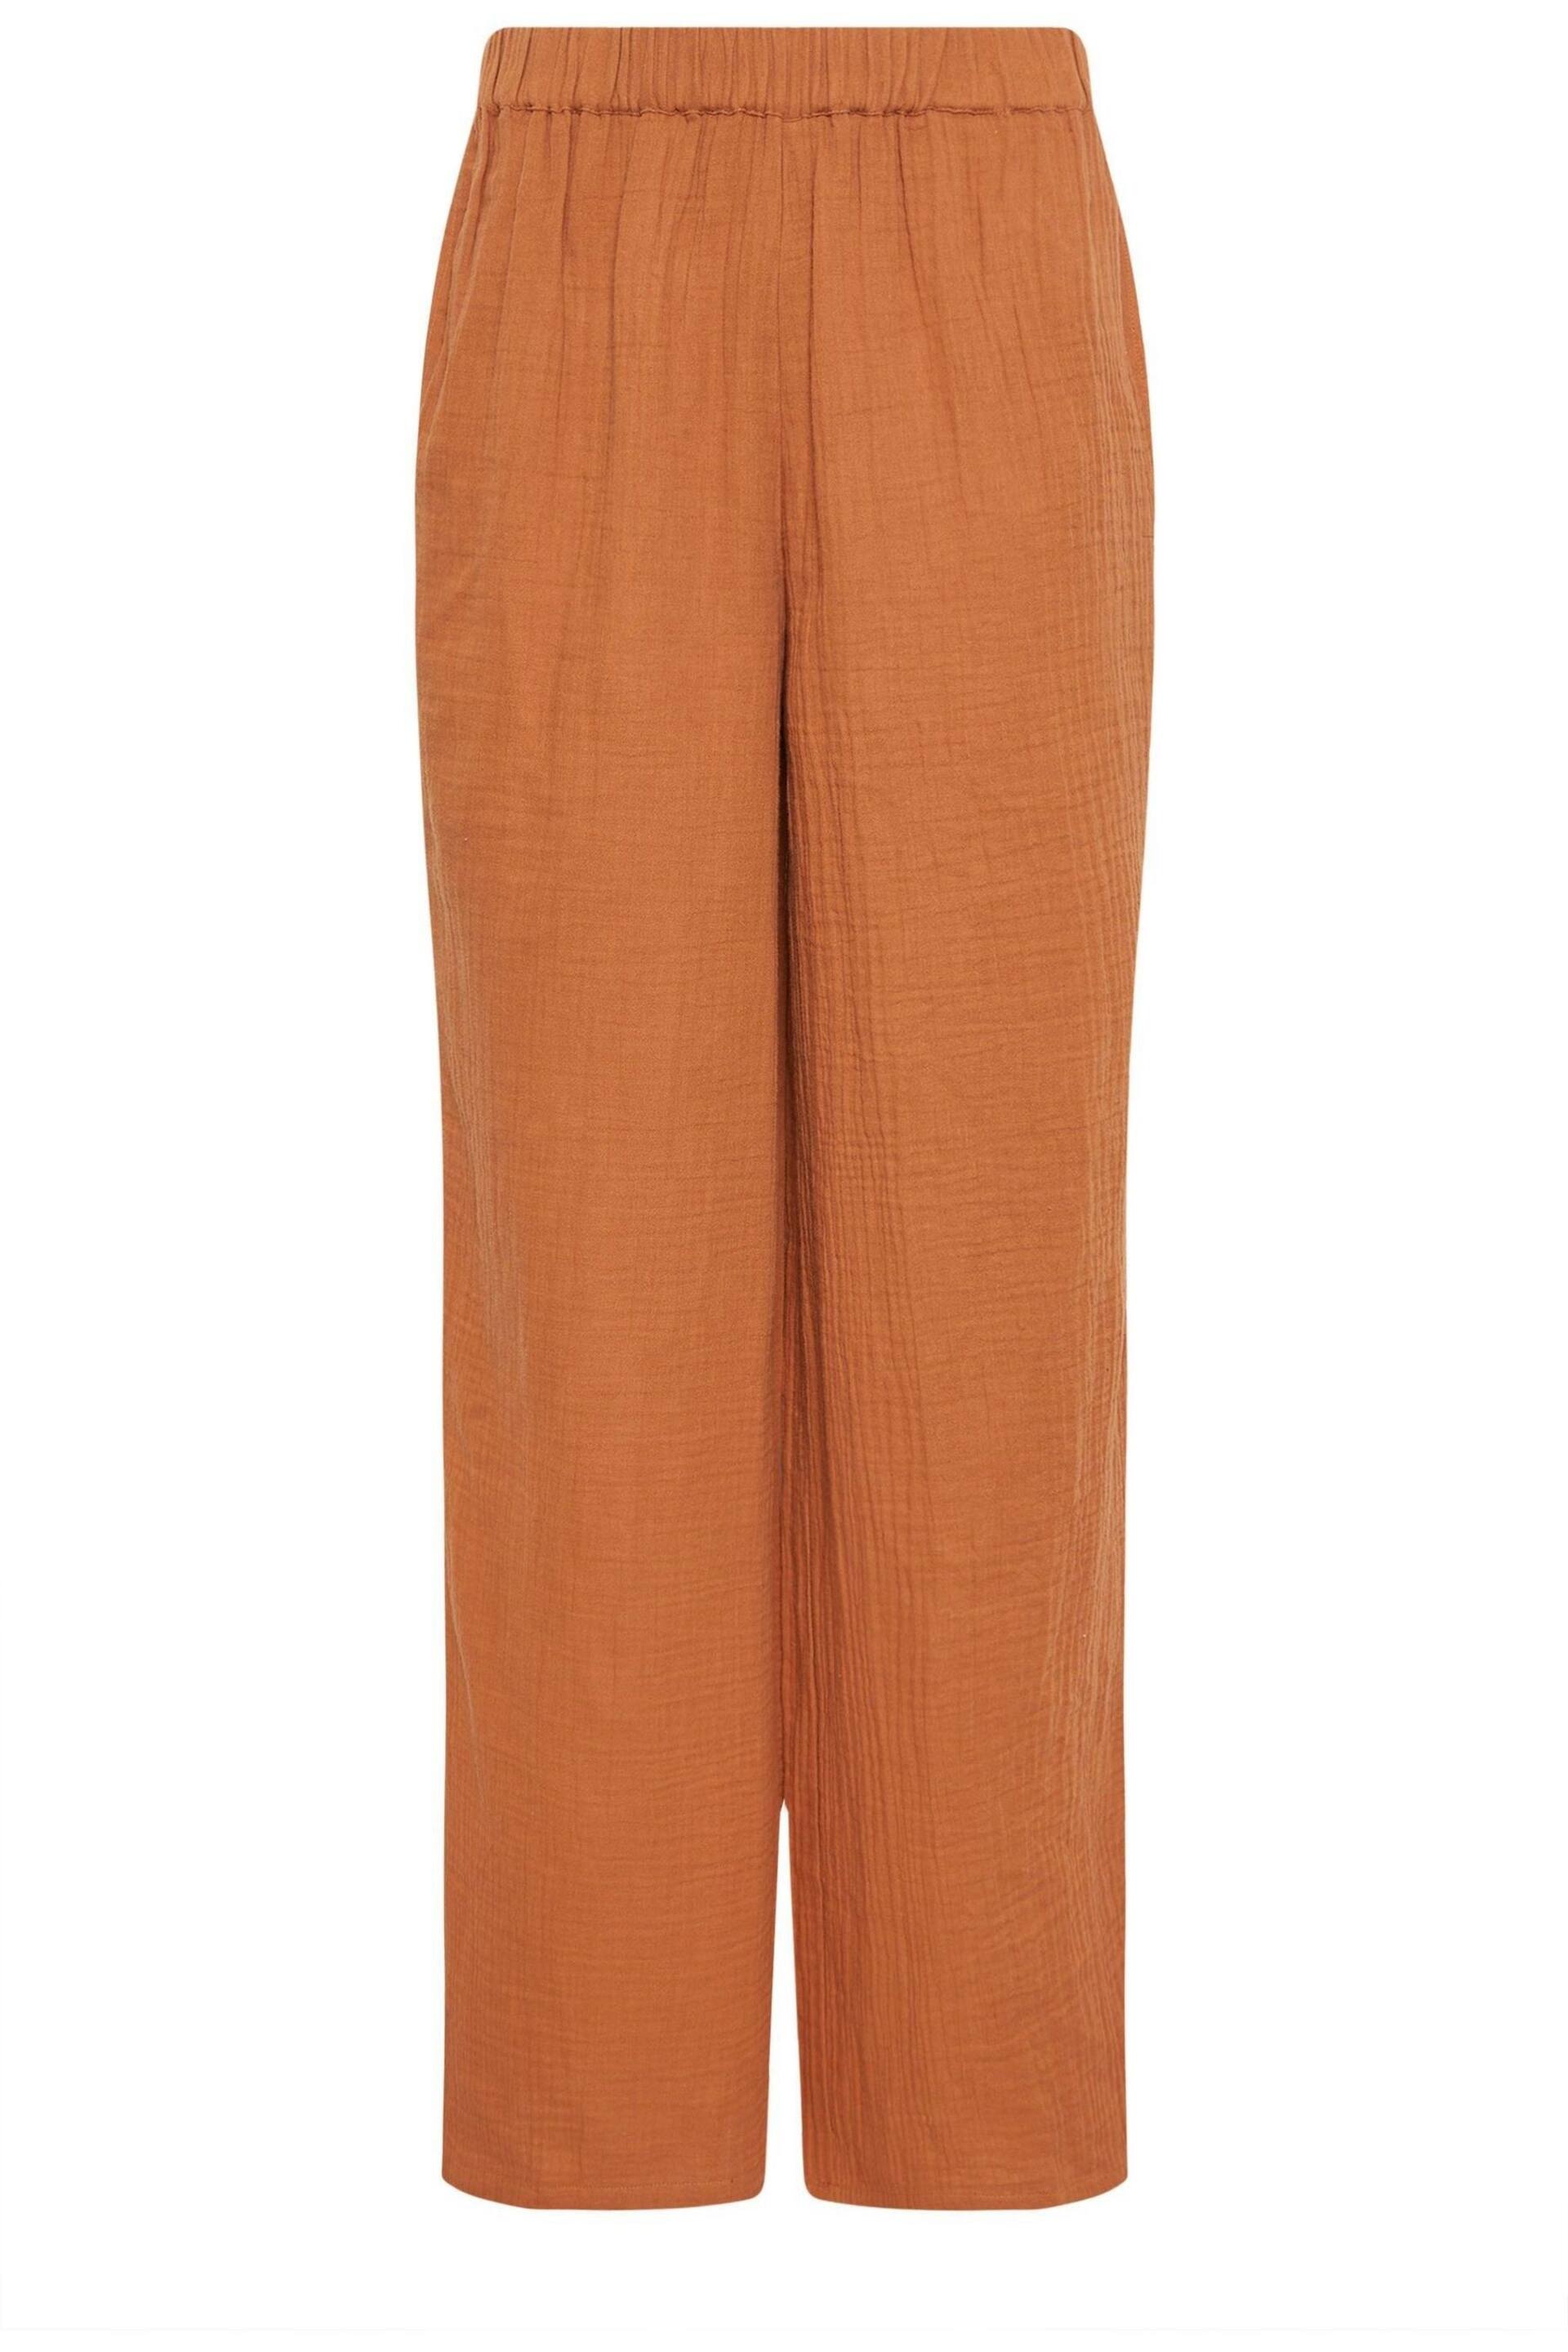 Long Tall Sally Orange Wide Leg Trousers - Image 5 of 5